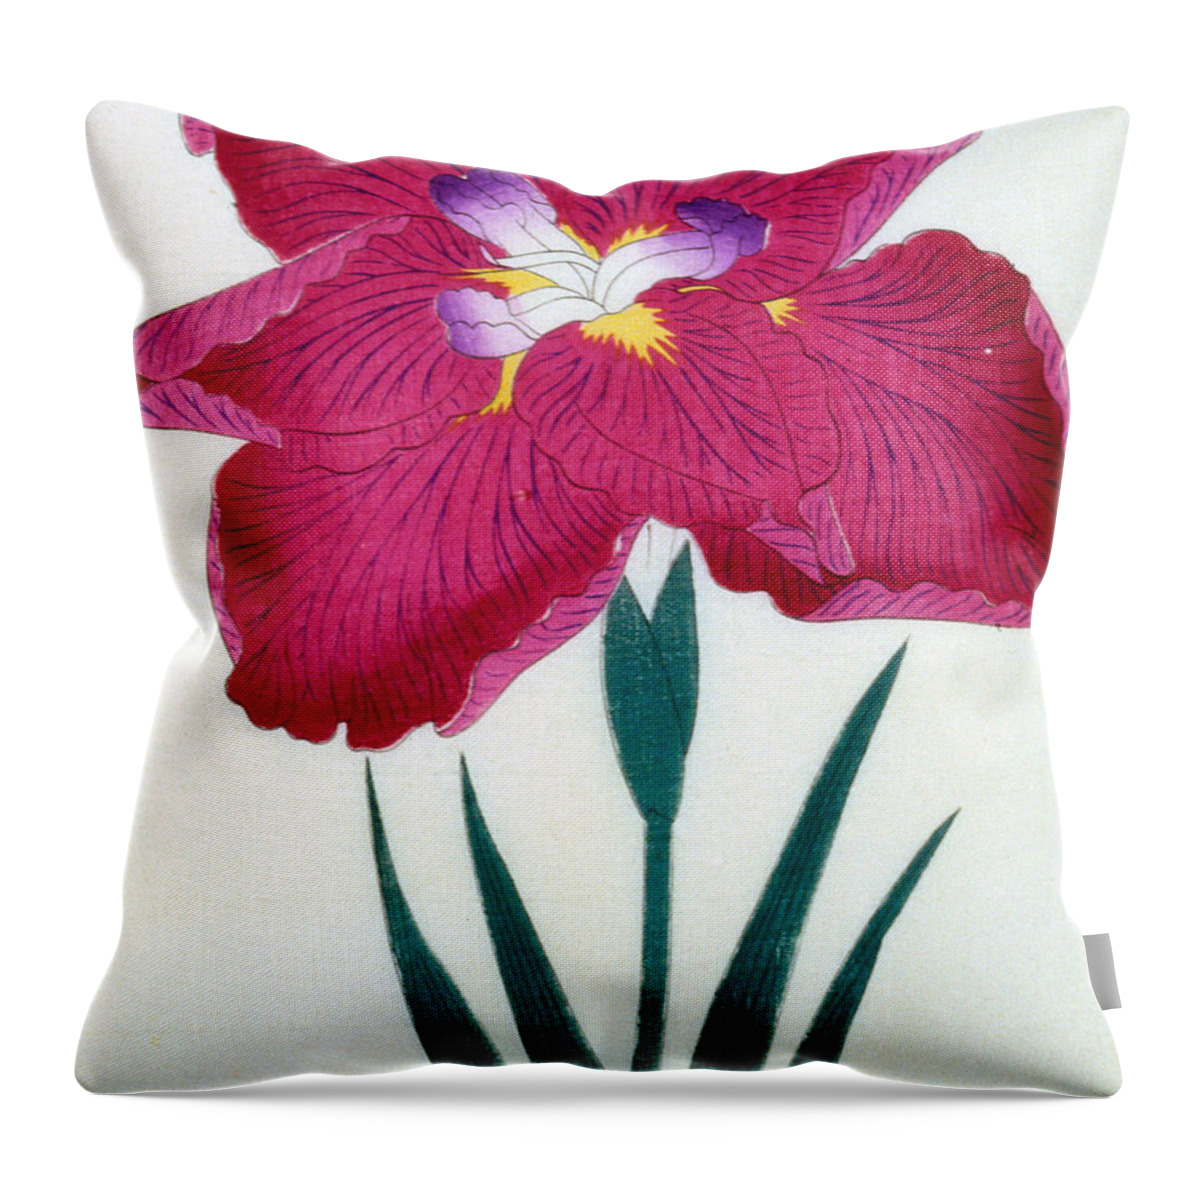 Floral Throw Pillow featuring the painting Japanese Flower by Japanese School